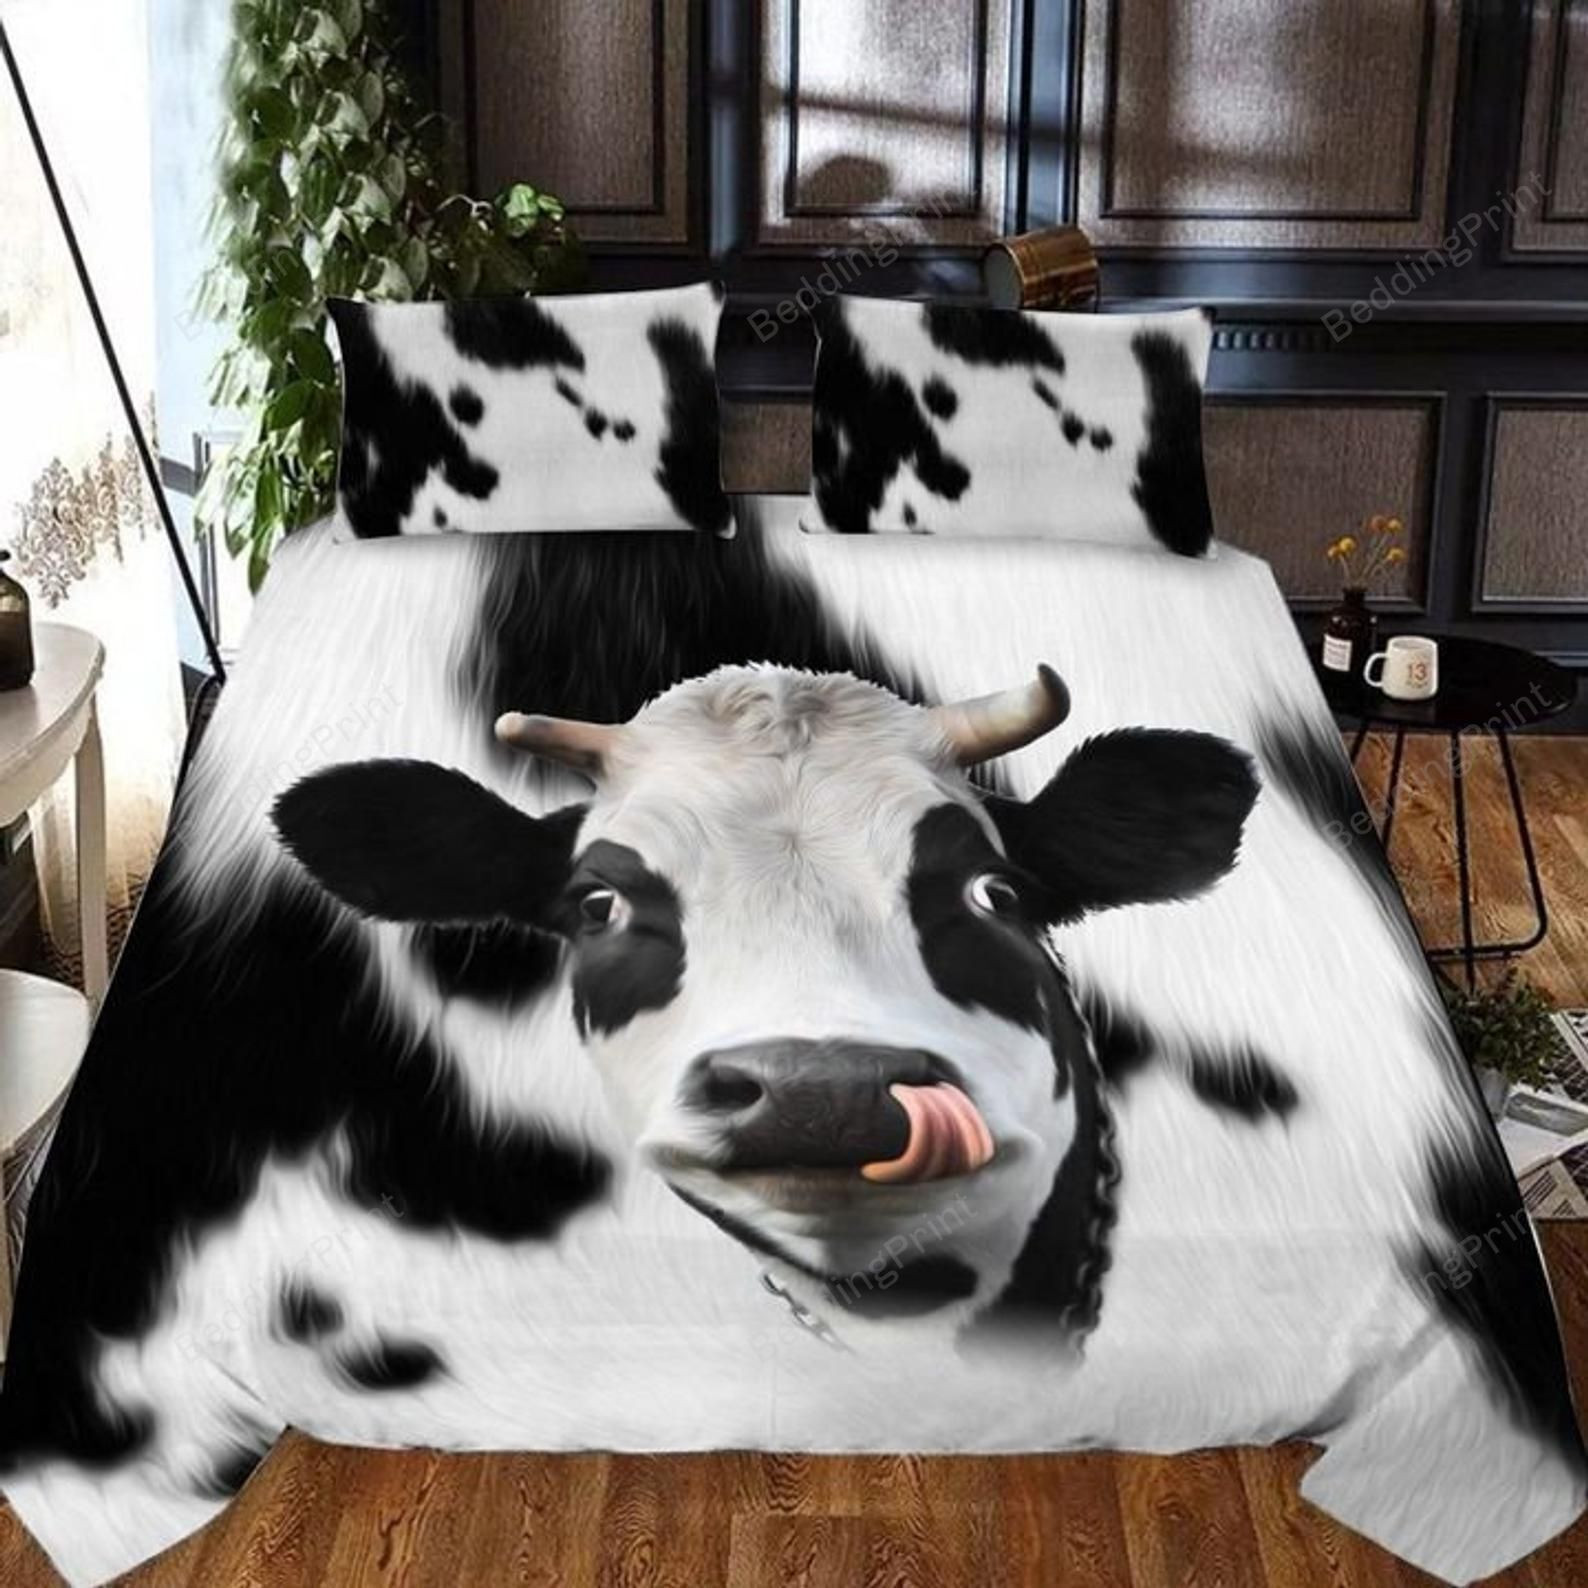 Funny Cow Bedding Set Bet Sheets Duvet Cover Bedding Sets Please Note This Is A Duvet Cover 9312